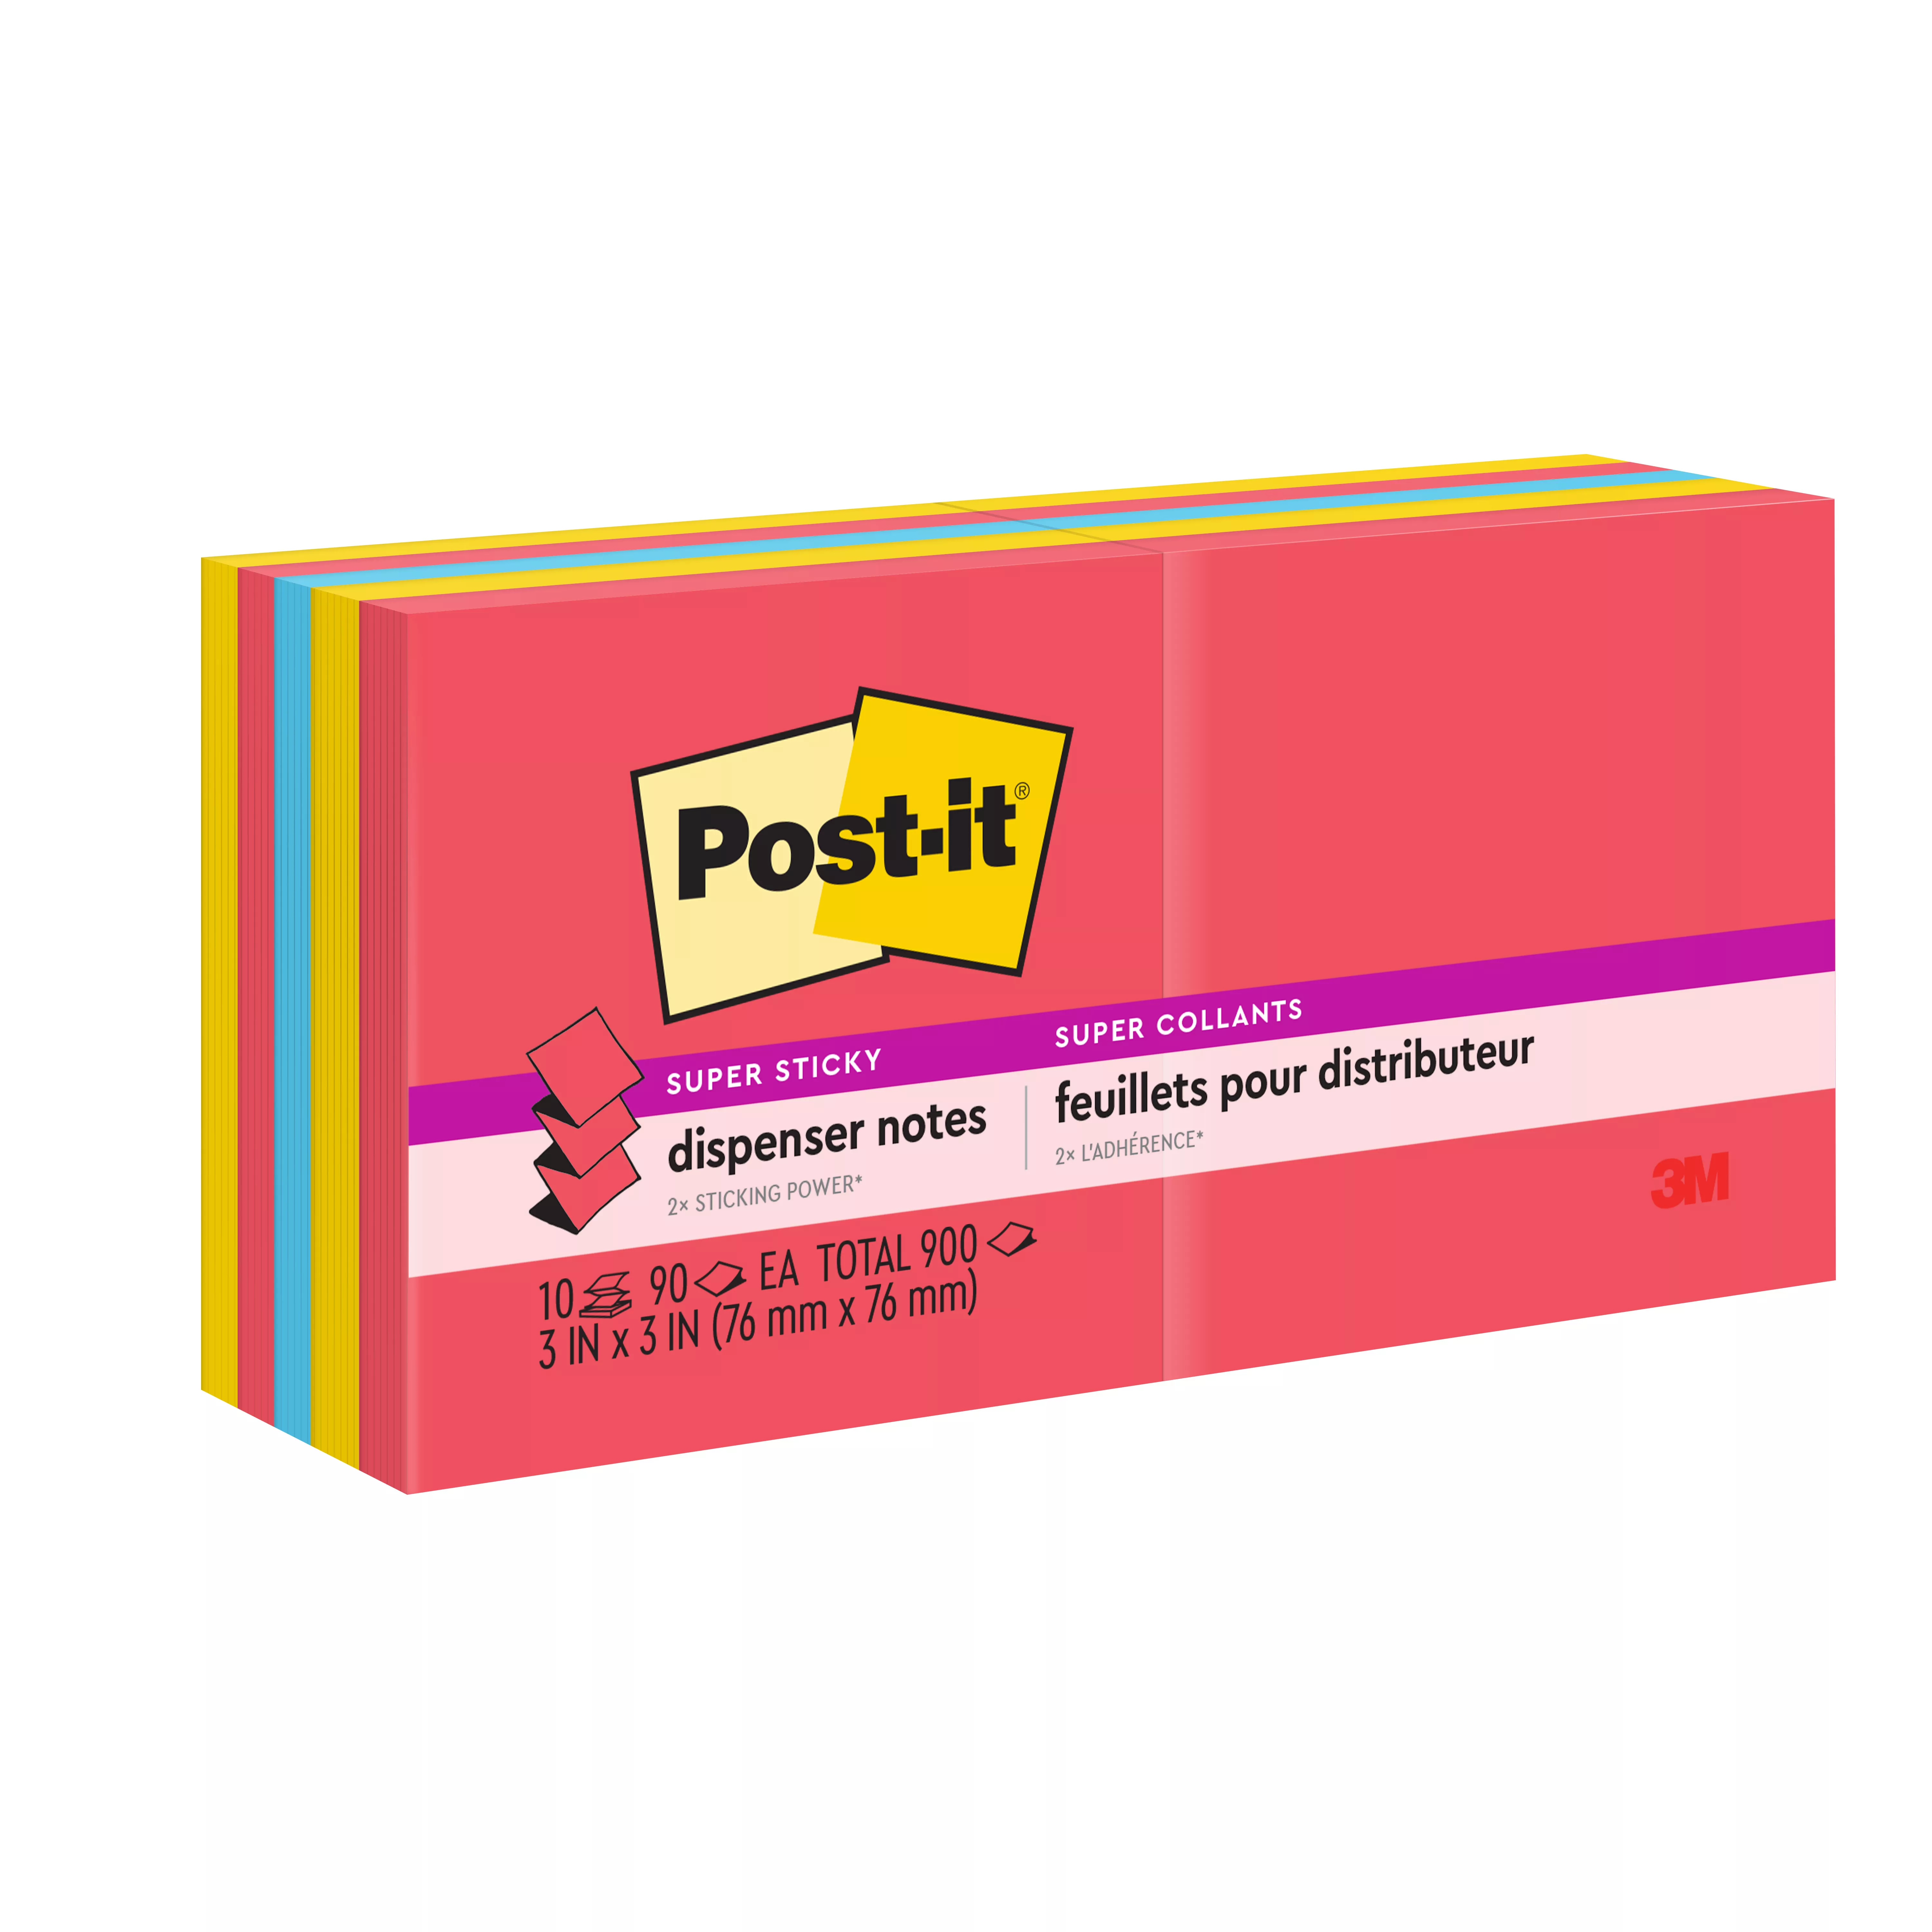 Post-it® Super Sticky Dispenser Pop-up Notes R330-10SSAN, 3 in x 3 in (76 mm x 76 mm)